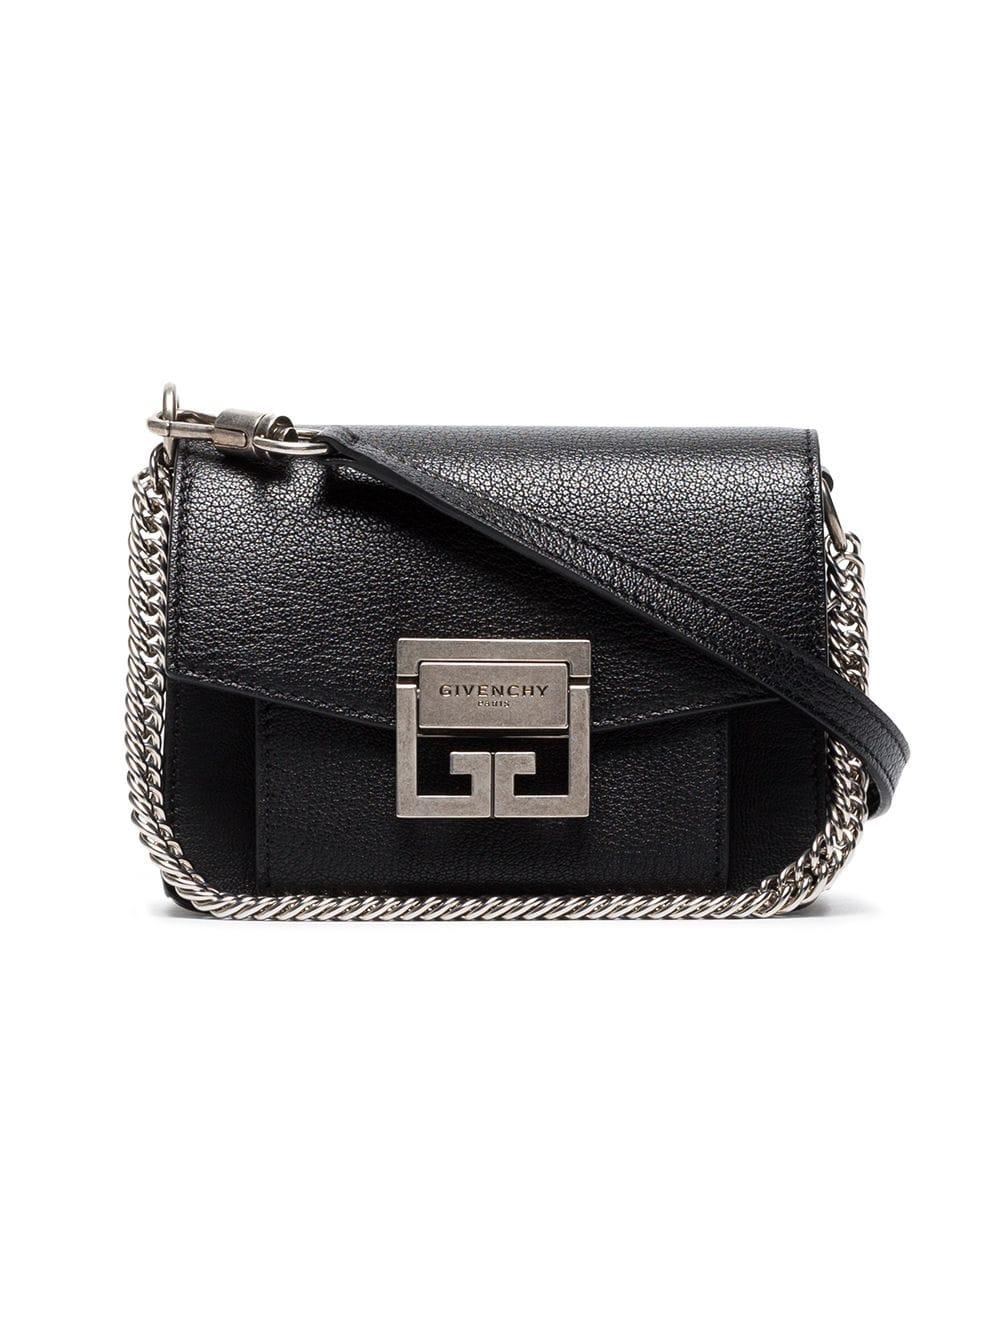 Givenchy Leather Mini Gv3 Bag in Black - Lyst